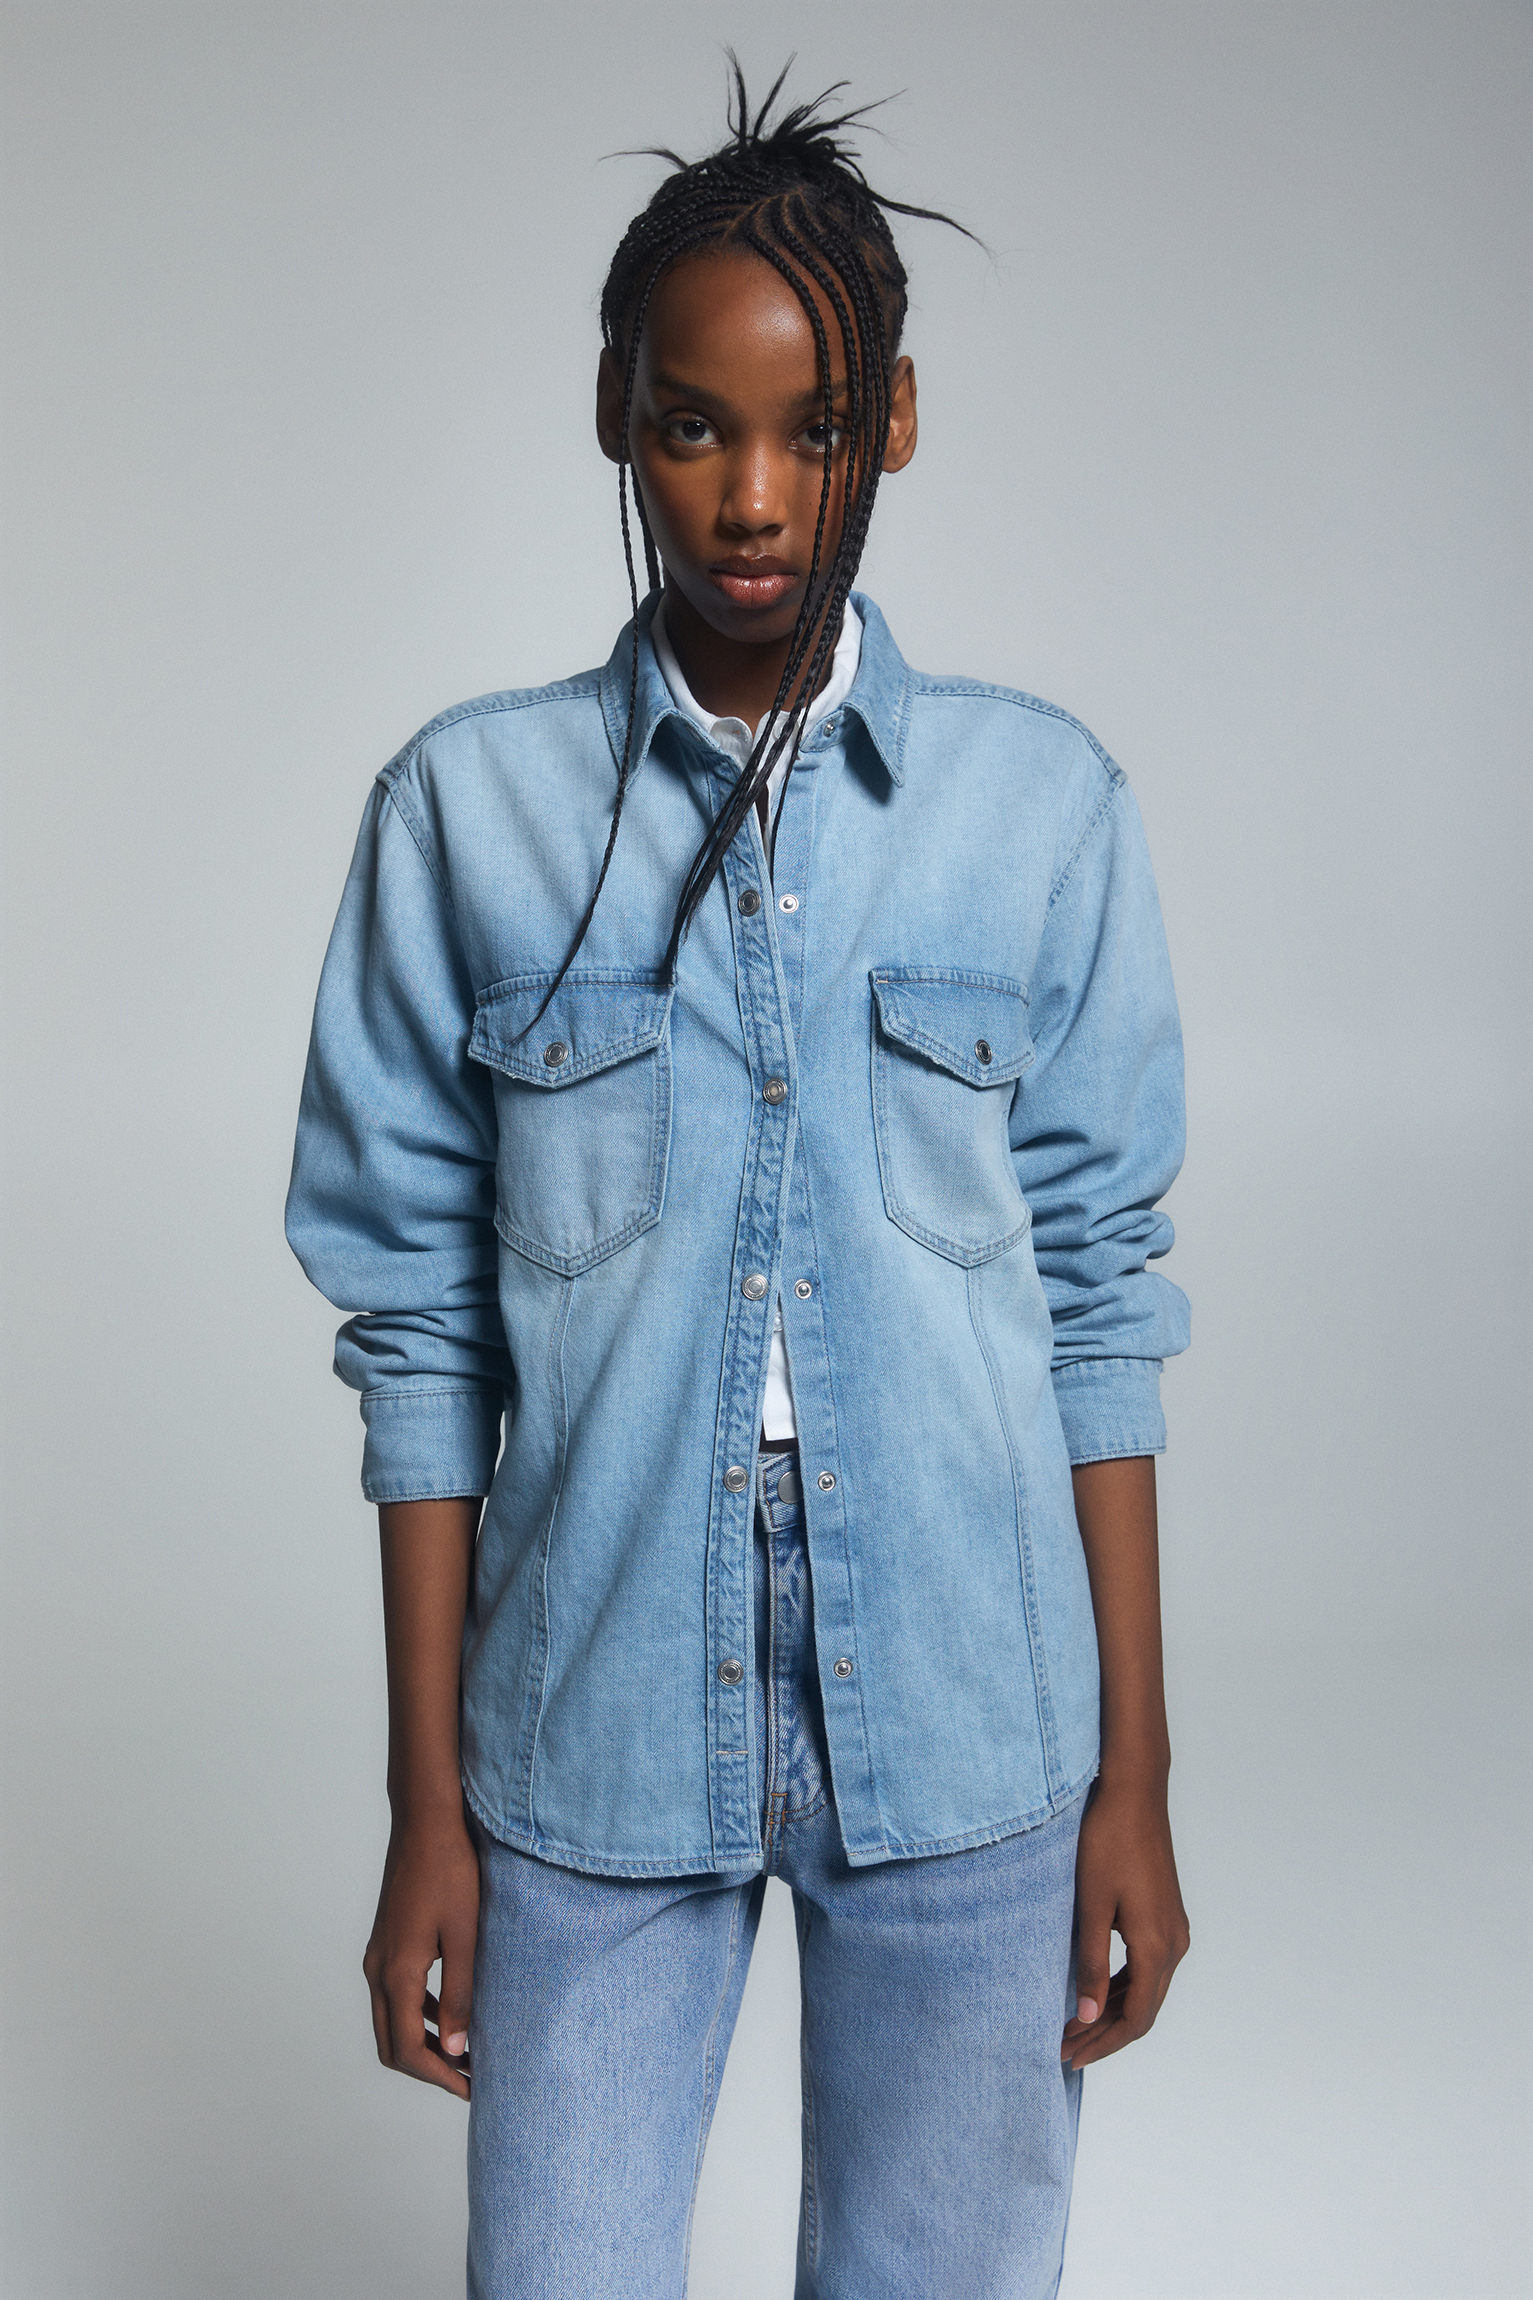 What To Wear With A Denim Shirt: 6 Style Tips | NA-KD